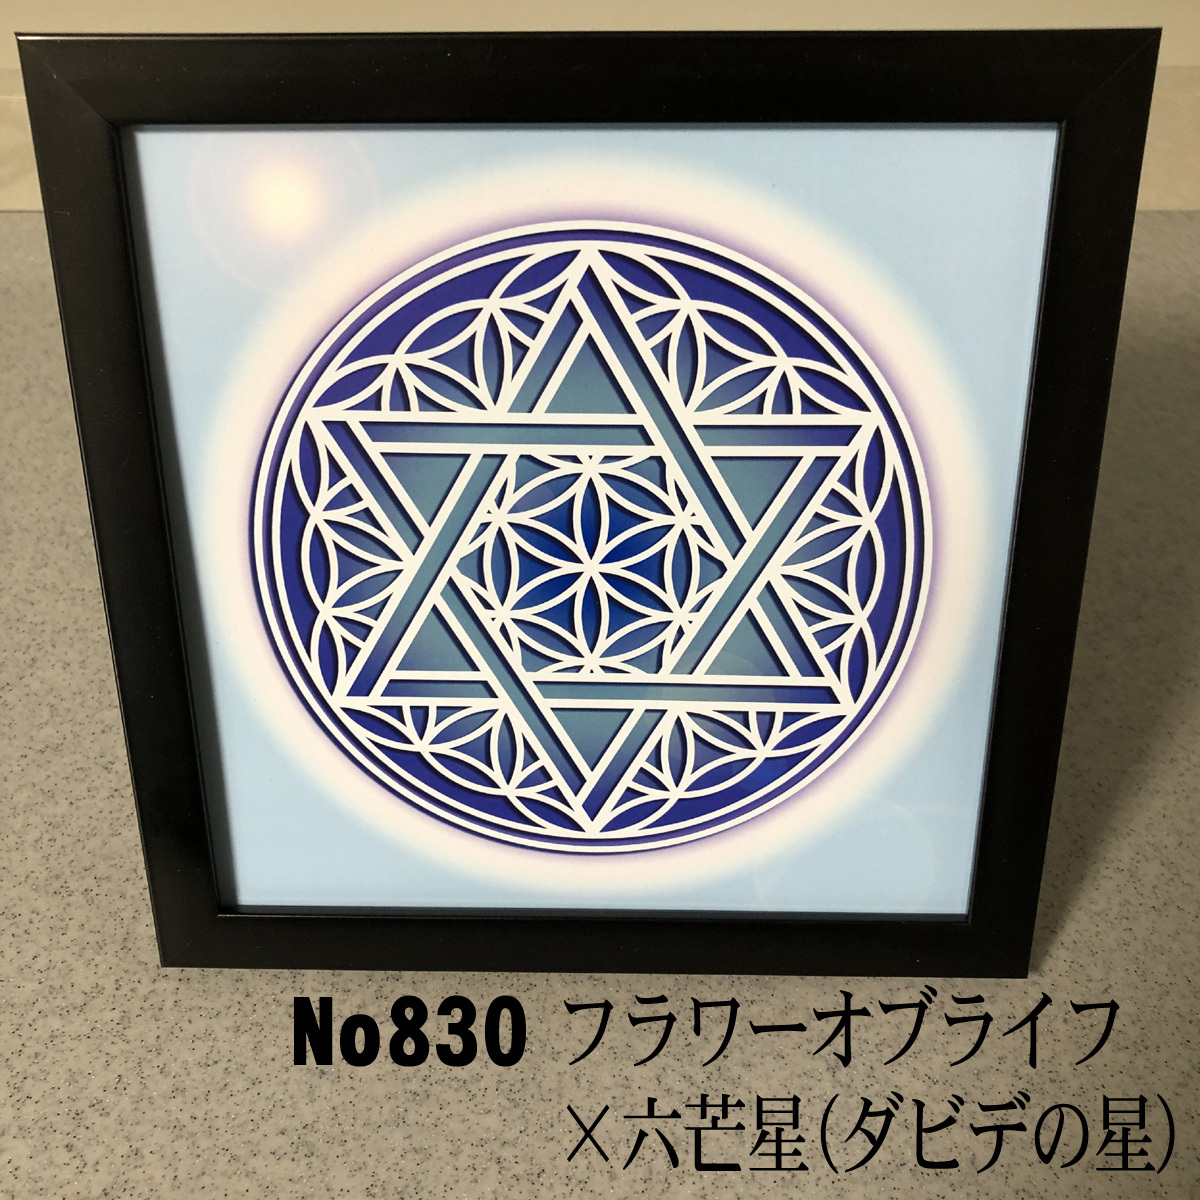 ★Flower of Life x Hexagram (Star of David) Sacred Geometric Pattern with Simple Frame NO830★, Handmade items, interior, miscellaneous goods, ornament, object